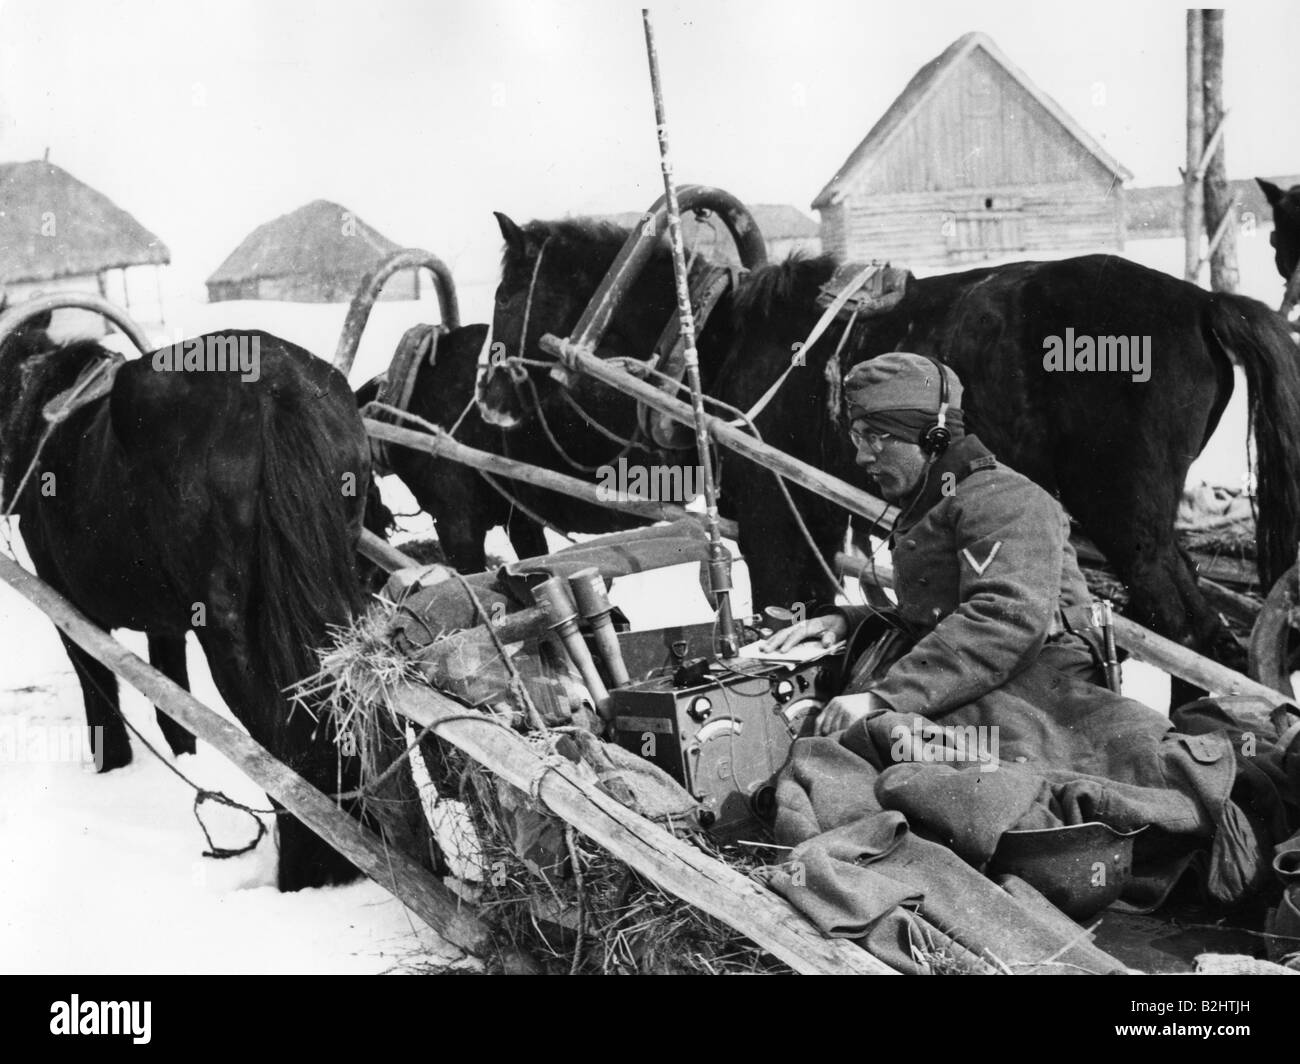 events, Second World War / WWII, Russia 1942 / 1943, German radio operator on a sleigh, winter 1941 / 1942, soldier, signals, Eastern Front, Soviet Union, USSR, 20th century, historic, historical, campaign, horses, village, equipment, Wehrmacht, people, 1940s, Stock Photo